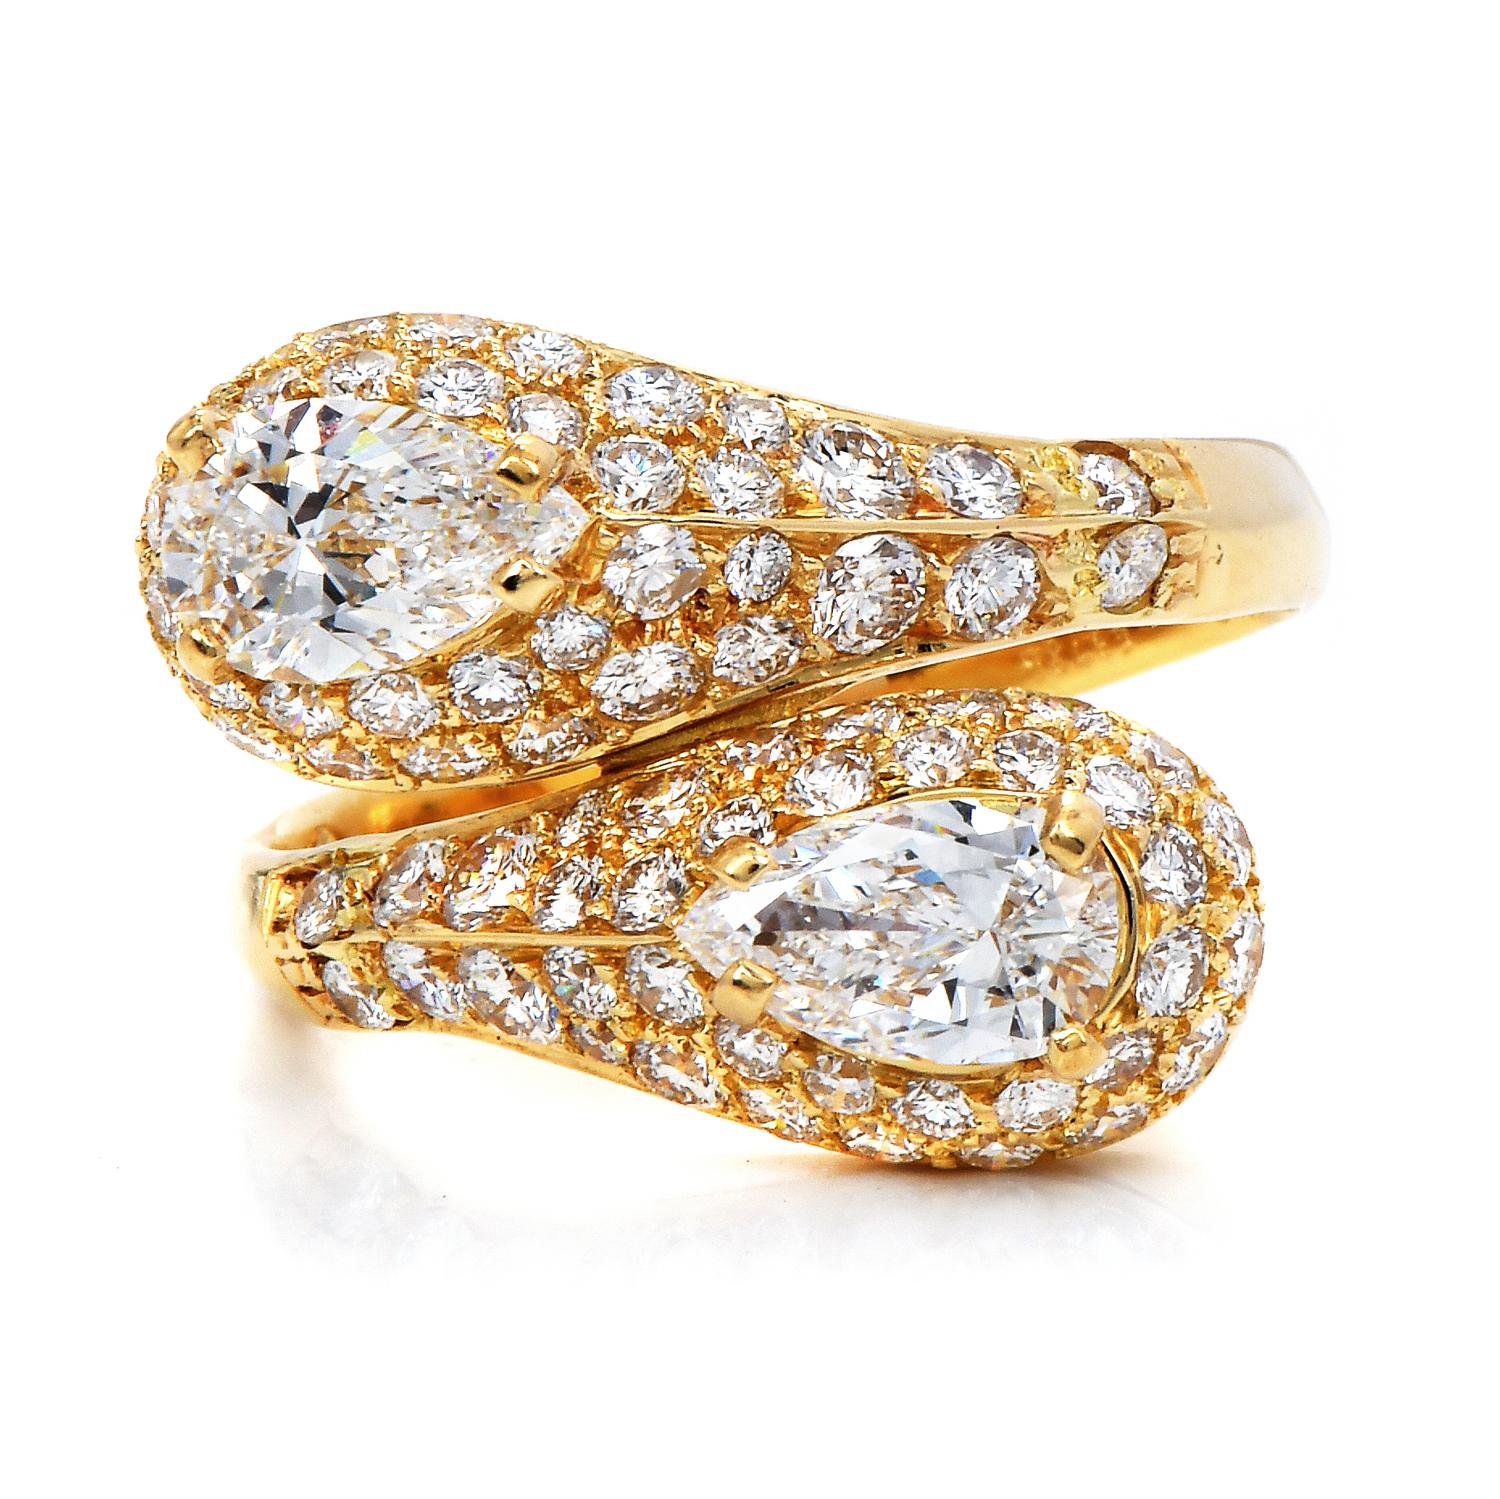 This by-pass diamond ring is an outstanding example of Cartier's timelessness and top quality.

Crafted in solid 18K Yellow Gold, all original.

Two sparkly pear cut, prong-set, Genuine Diamonds Top this exquisite ring, weighing collectively 1.60